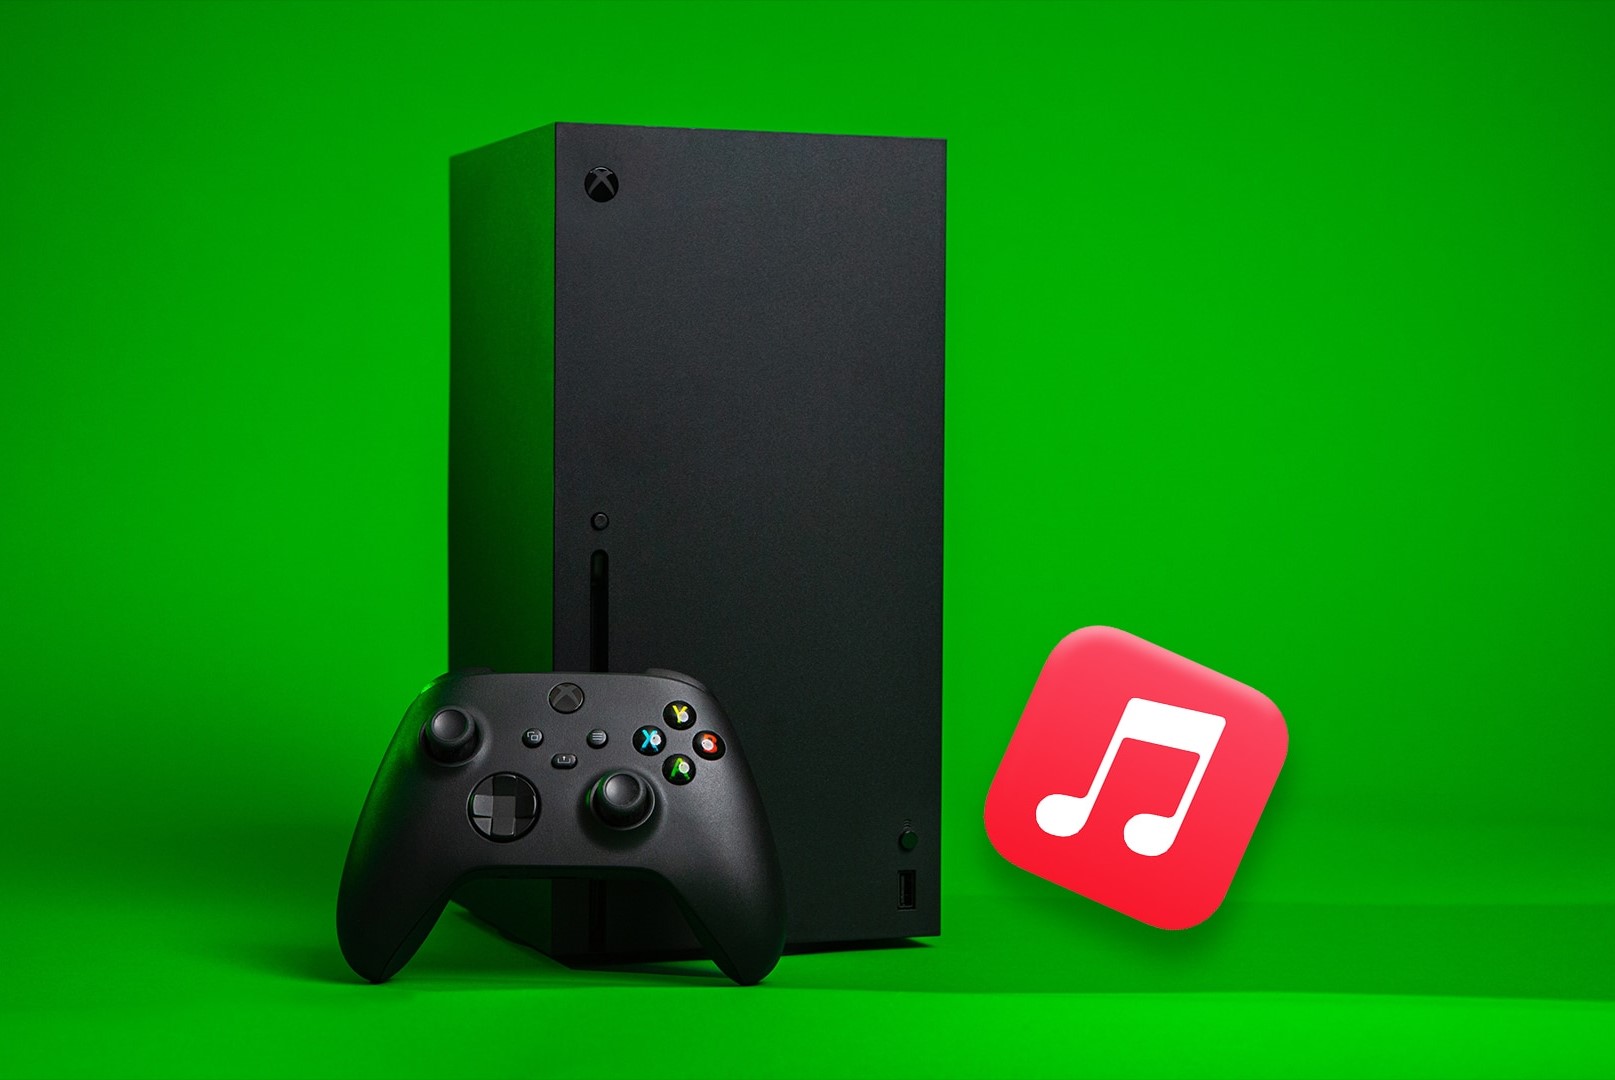 How To Play Music On Xbox Series X Or S